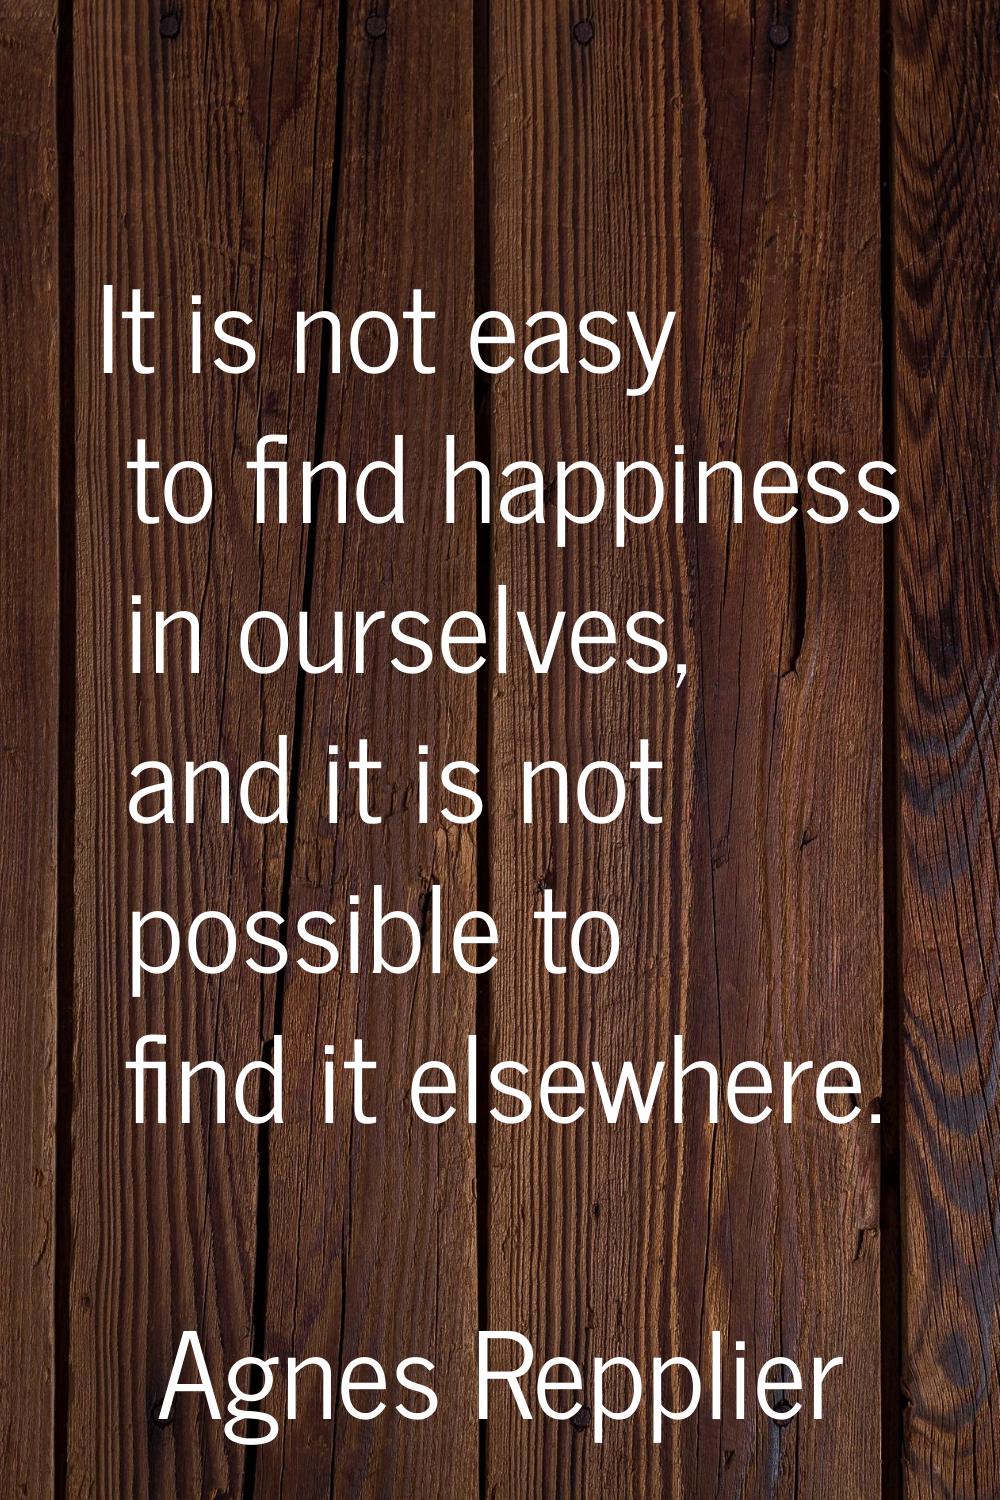 It is not easy to find happiness in ourselves, and it is not possible to find it elsewhere.